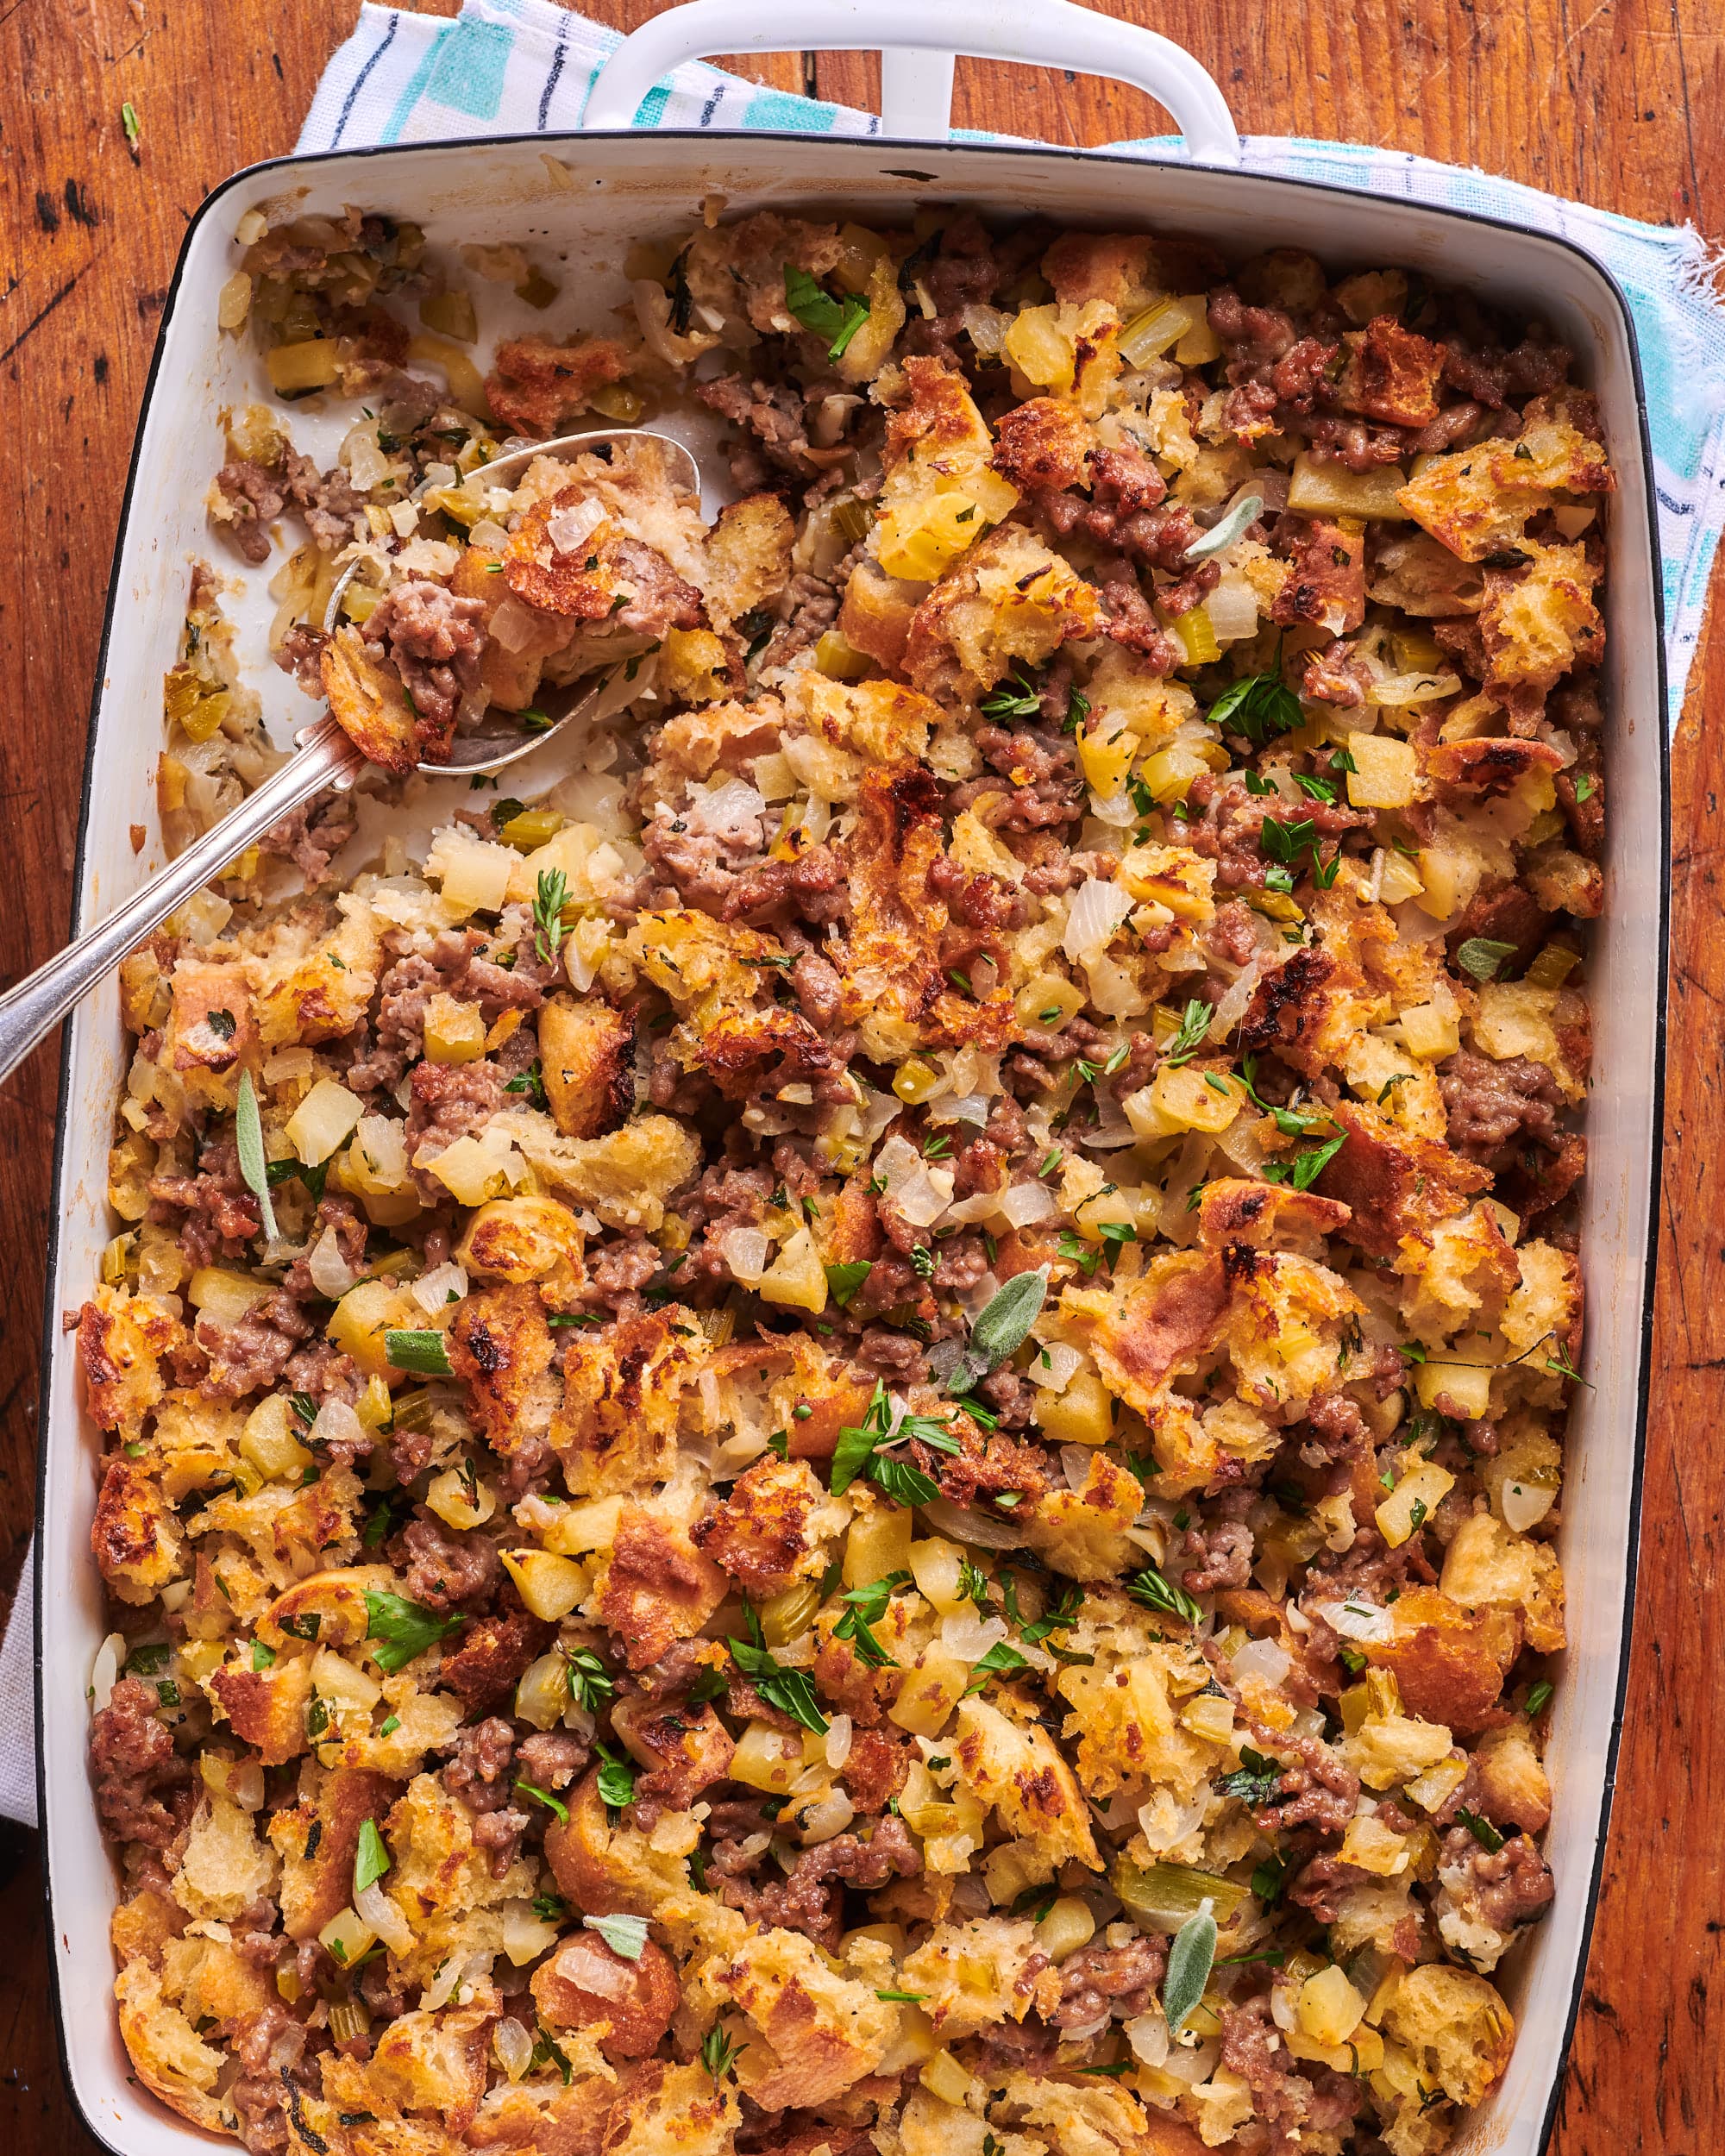 https://cdn.apartmenttherapy.info/image/upload/v1603475153/k/Photo/Recipes/2020-10-How-to-Cook-the-Best-Sausage-and-Herb-Stuffing/How-to-Cook-the-Best-Sausage-and-Herb-Stuffing_031.jpg